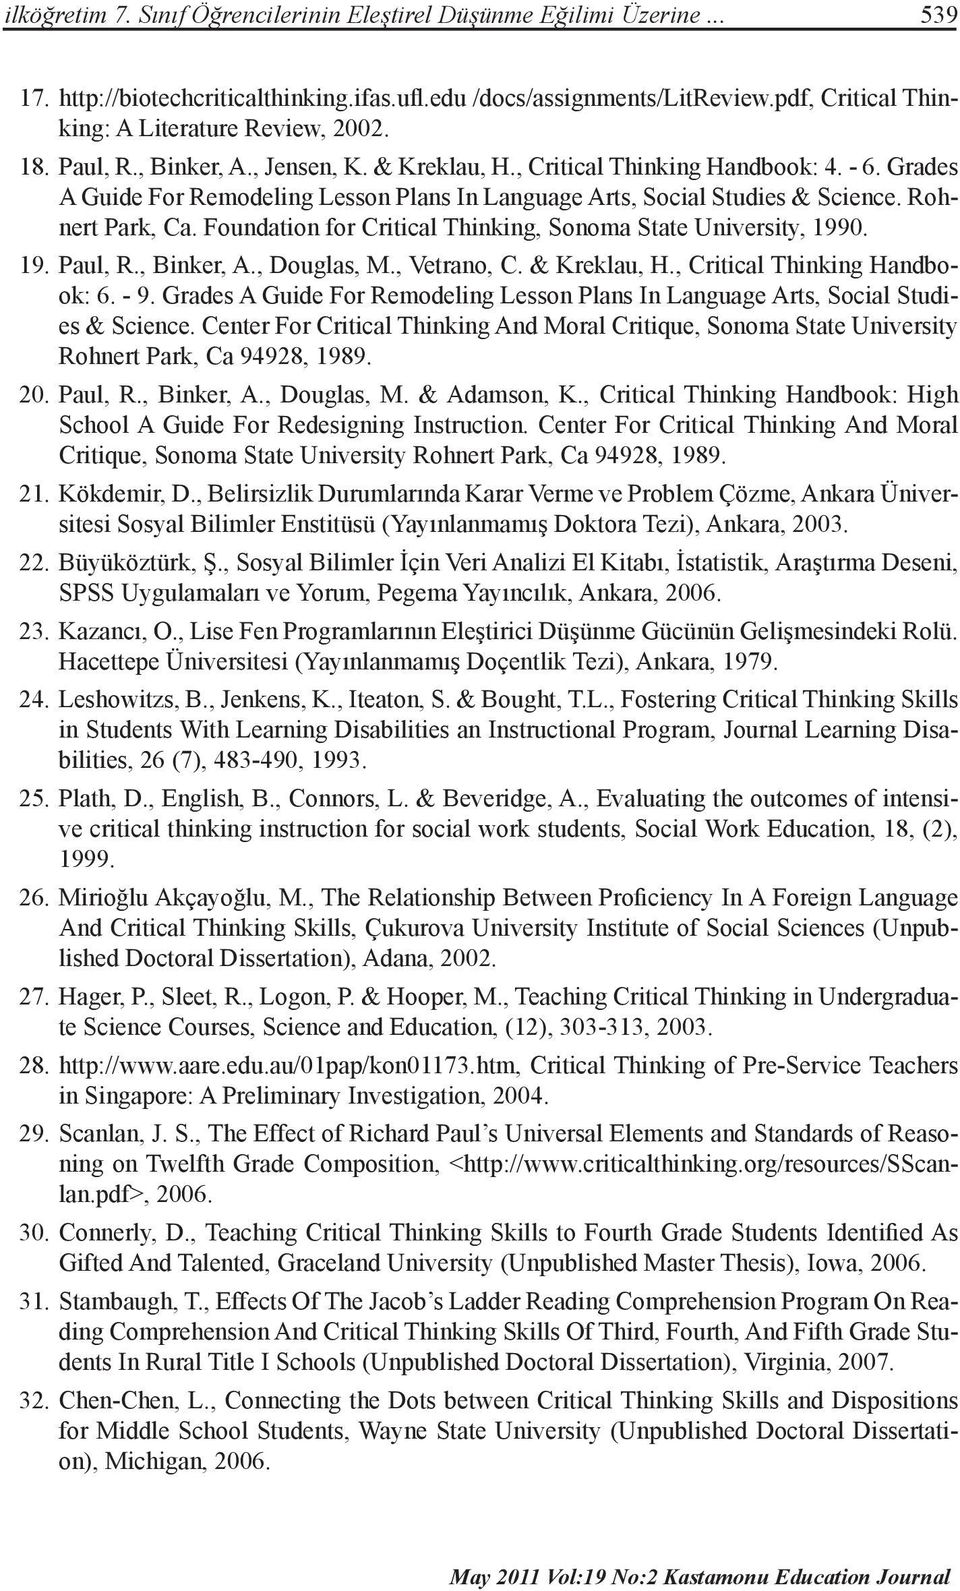 Grades A Guide For Remodeling Lesson Plans In Language Arts, Social Studies & Science. Rohnert Park, Ca. Foundation for Critical Thinking, Sonoma State University, 1990. 19. Paul, R., Binker, A.